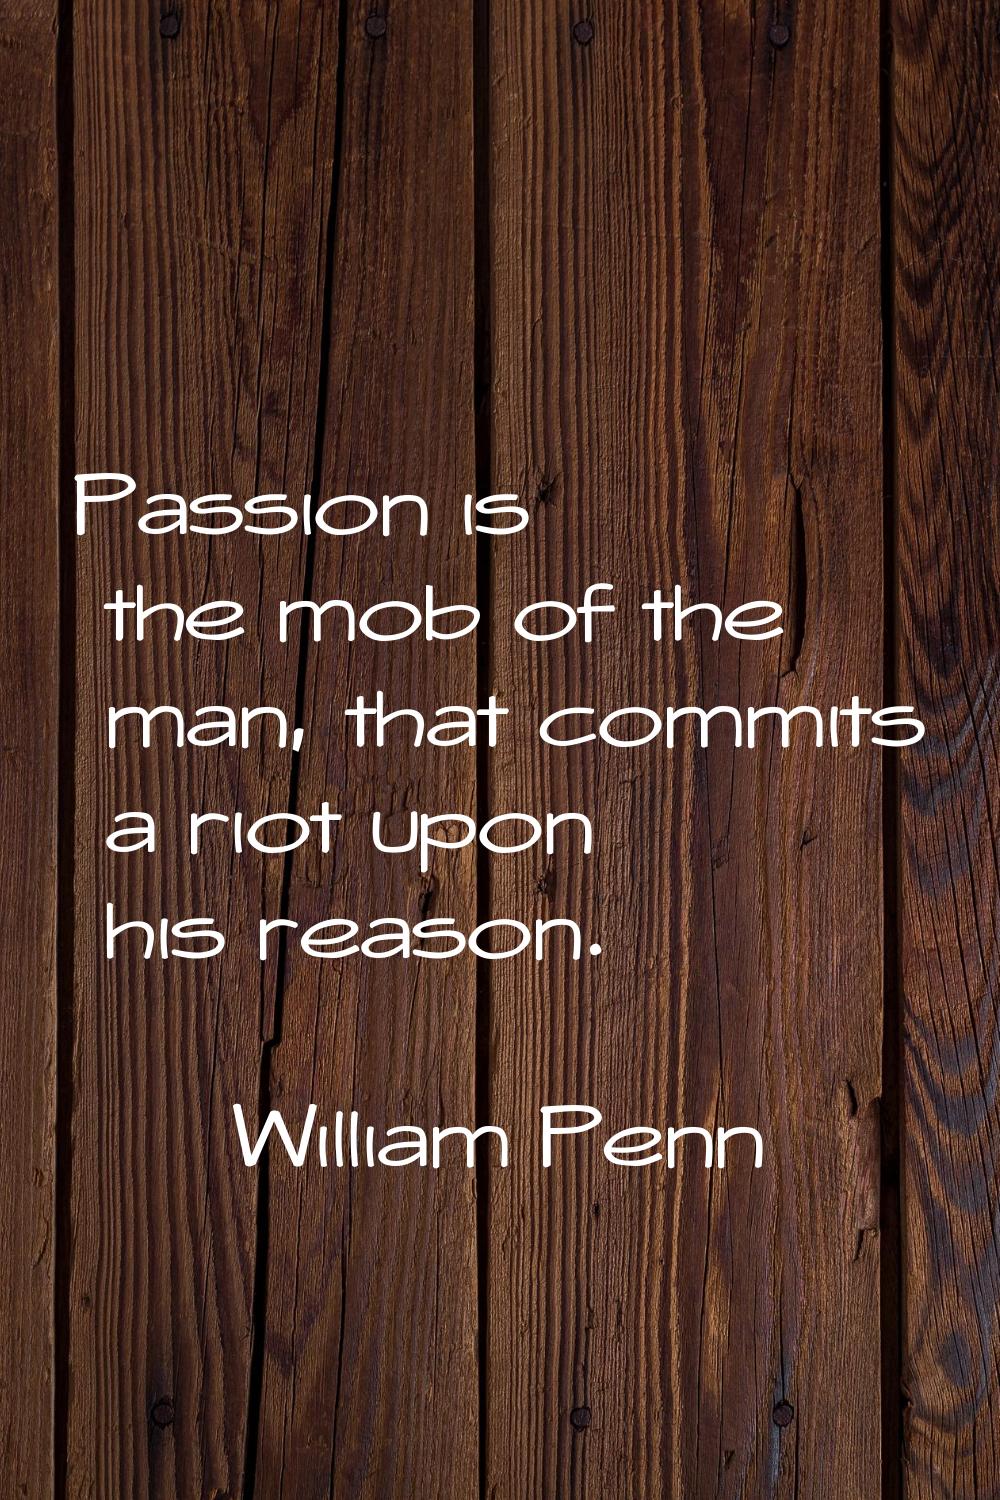 Passion is the mob of the man, that commits a riot upon his reason.